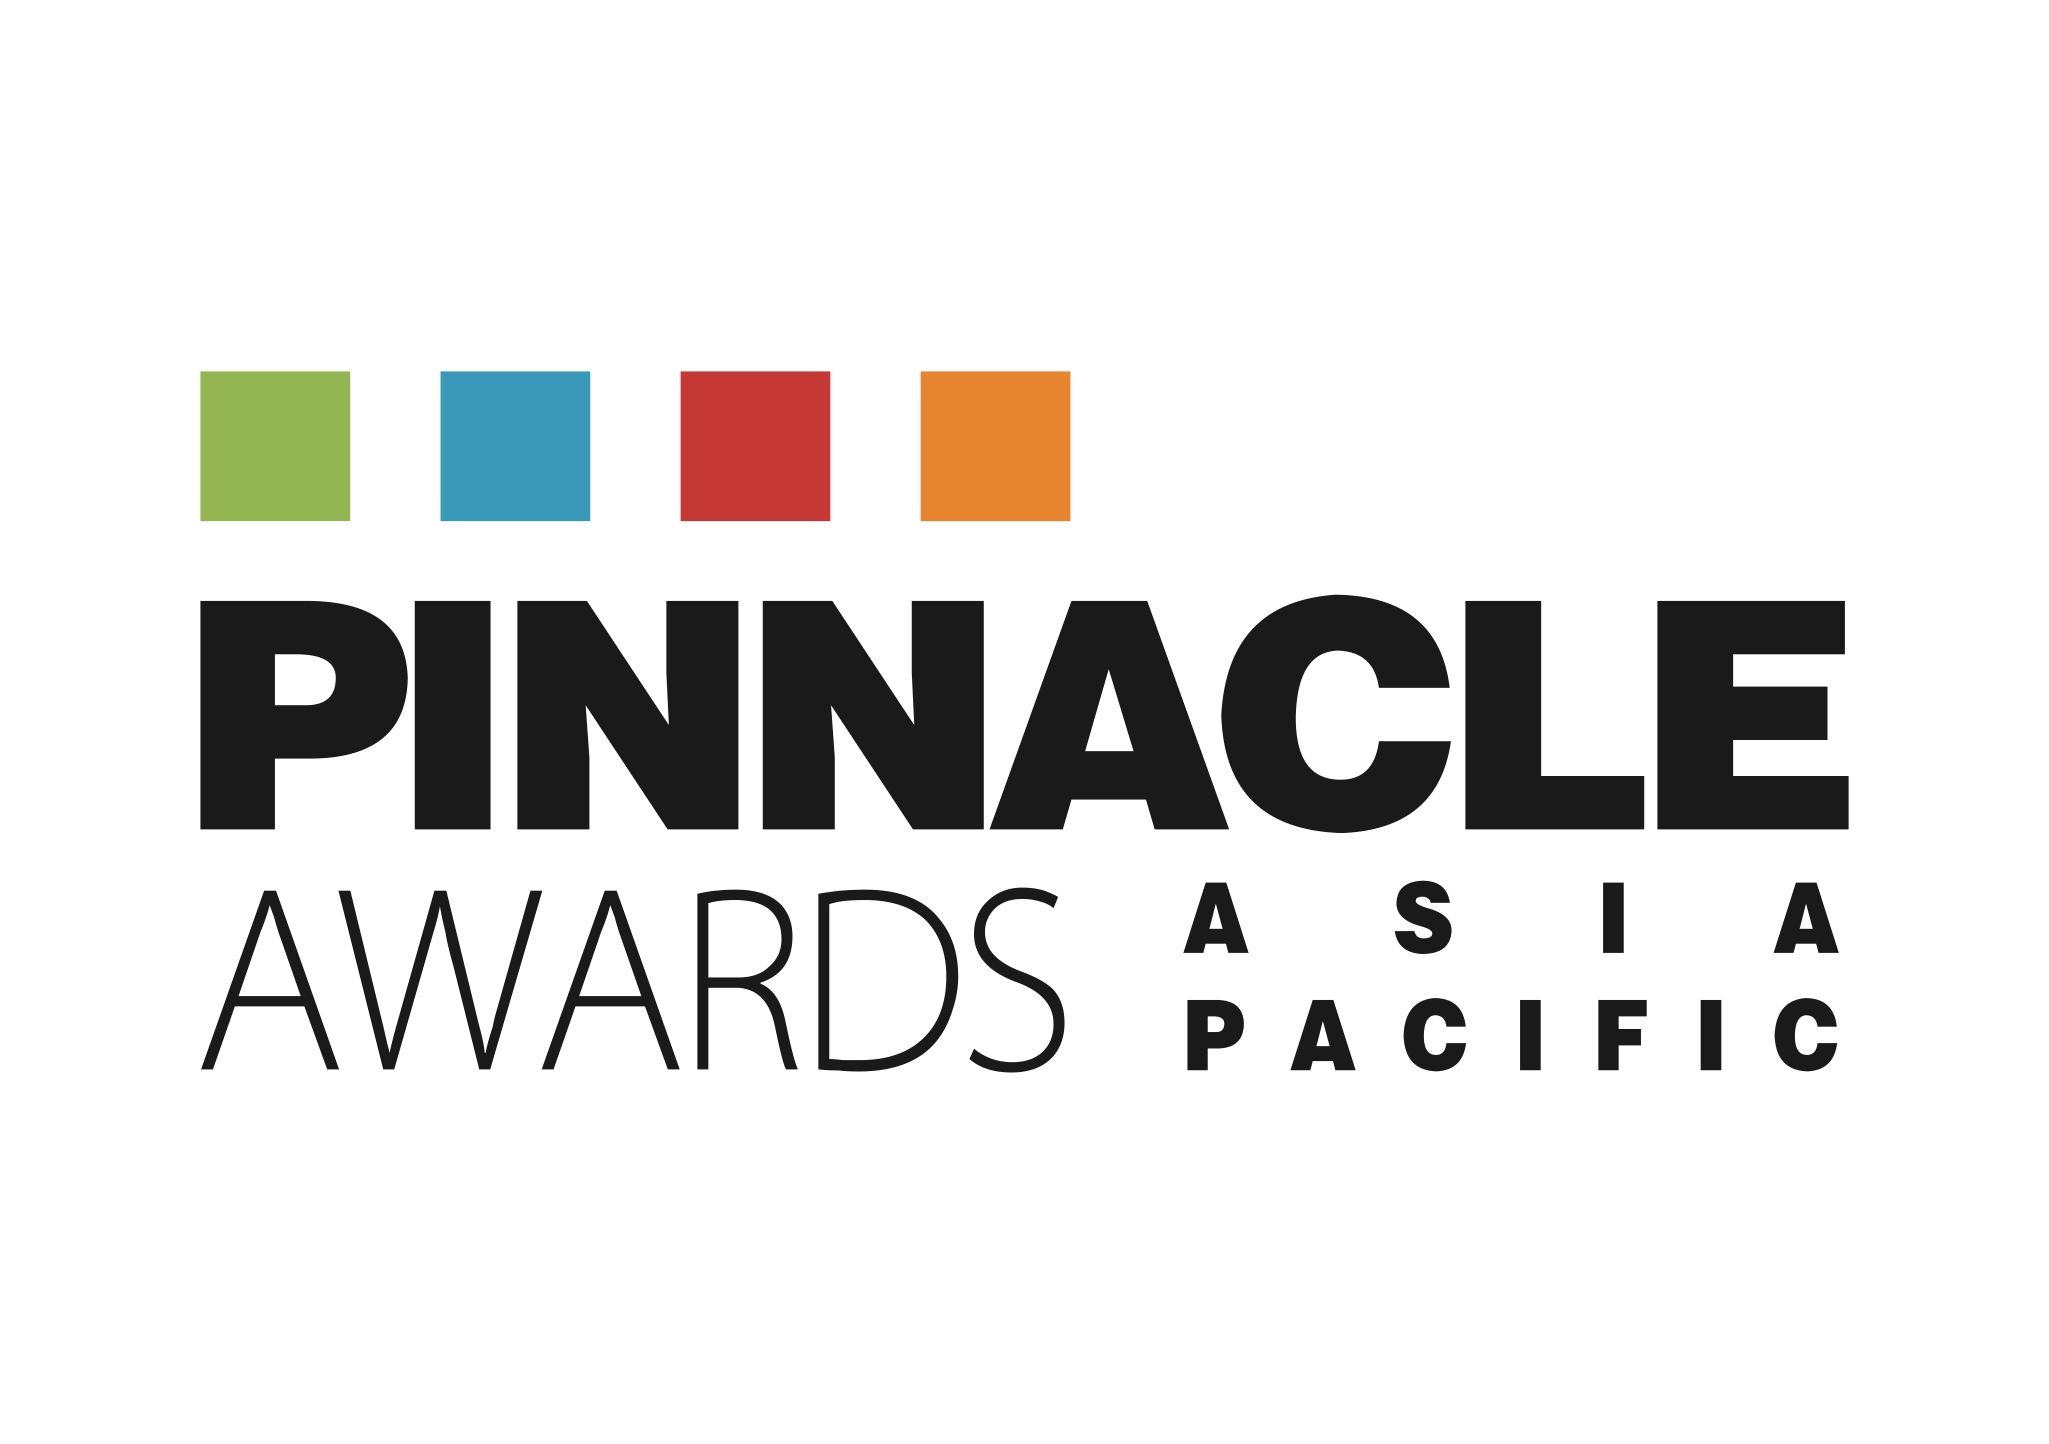 Winner in outdoor furniture catalog of the 2017 PINNACLE AWARD Asia Pacific